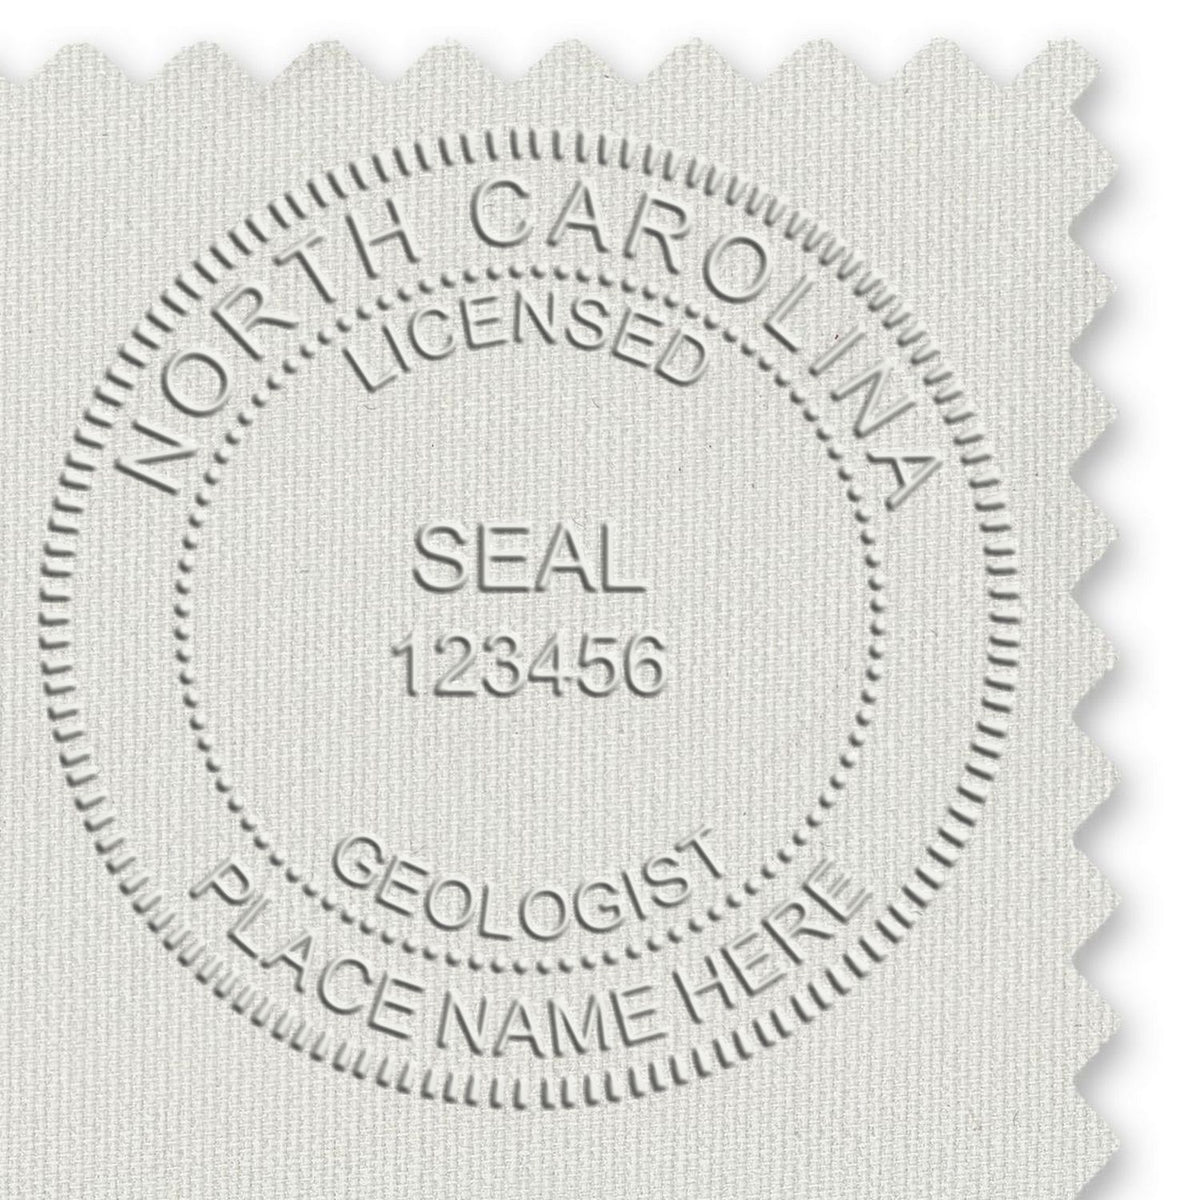 A lifestyle photo showing a stamped image of the Heavy Duty Cast Iron North Carolina Geologist Seal Embosser on a piece of paper